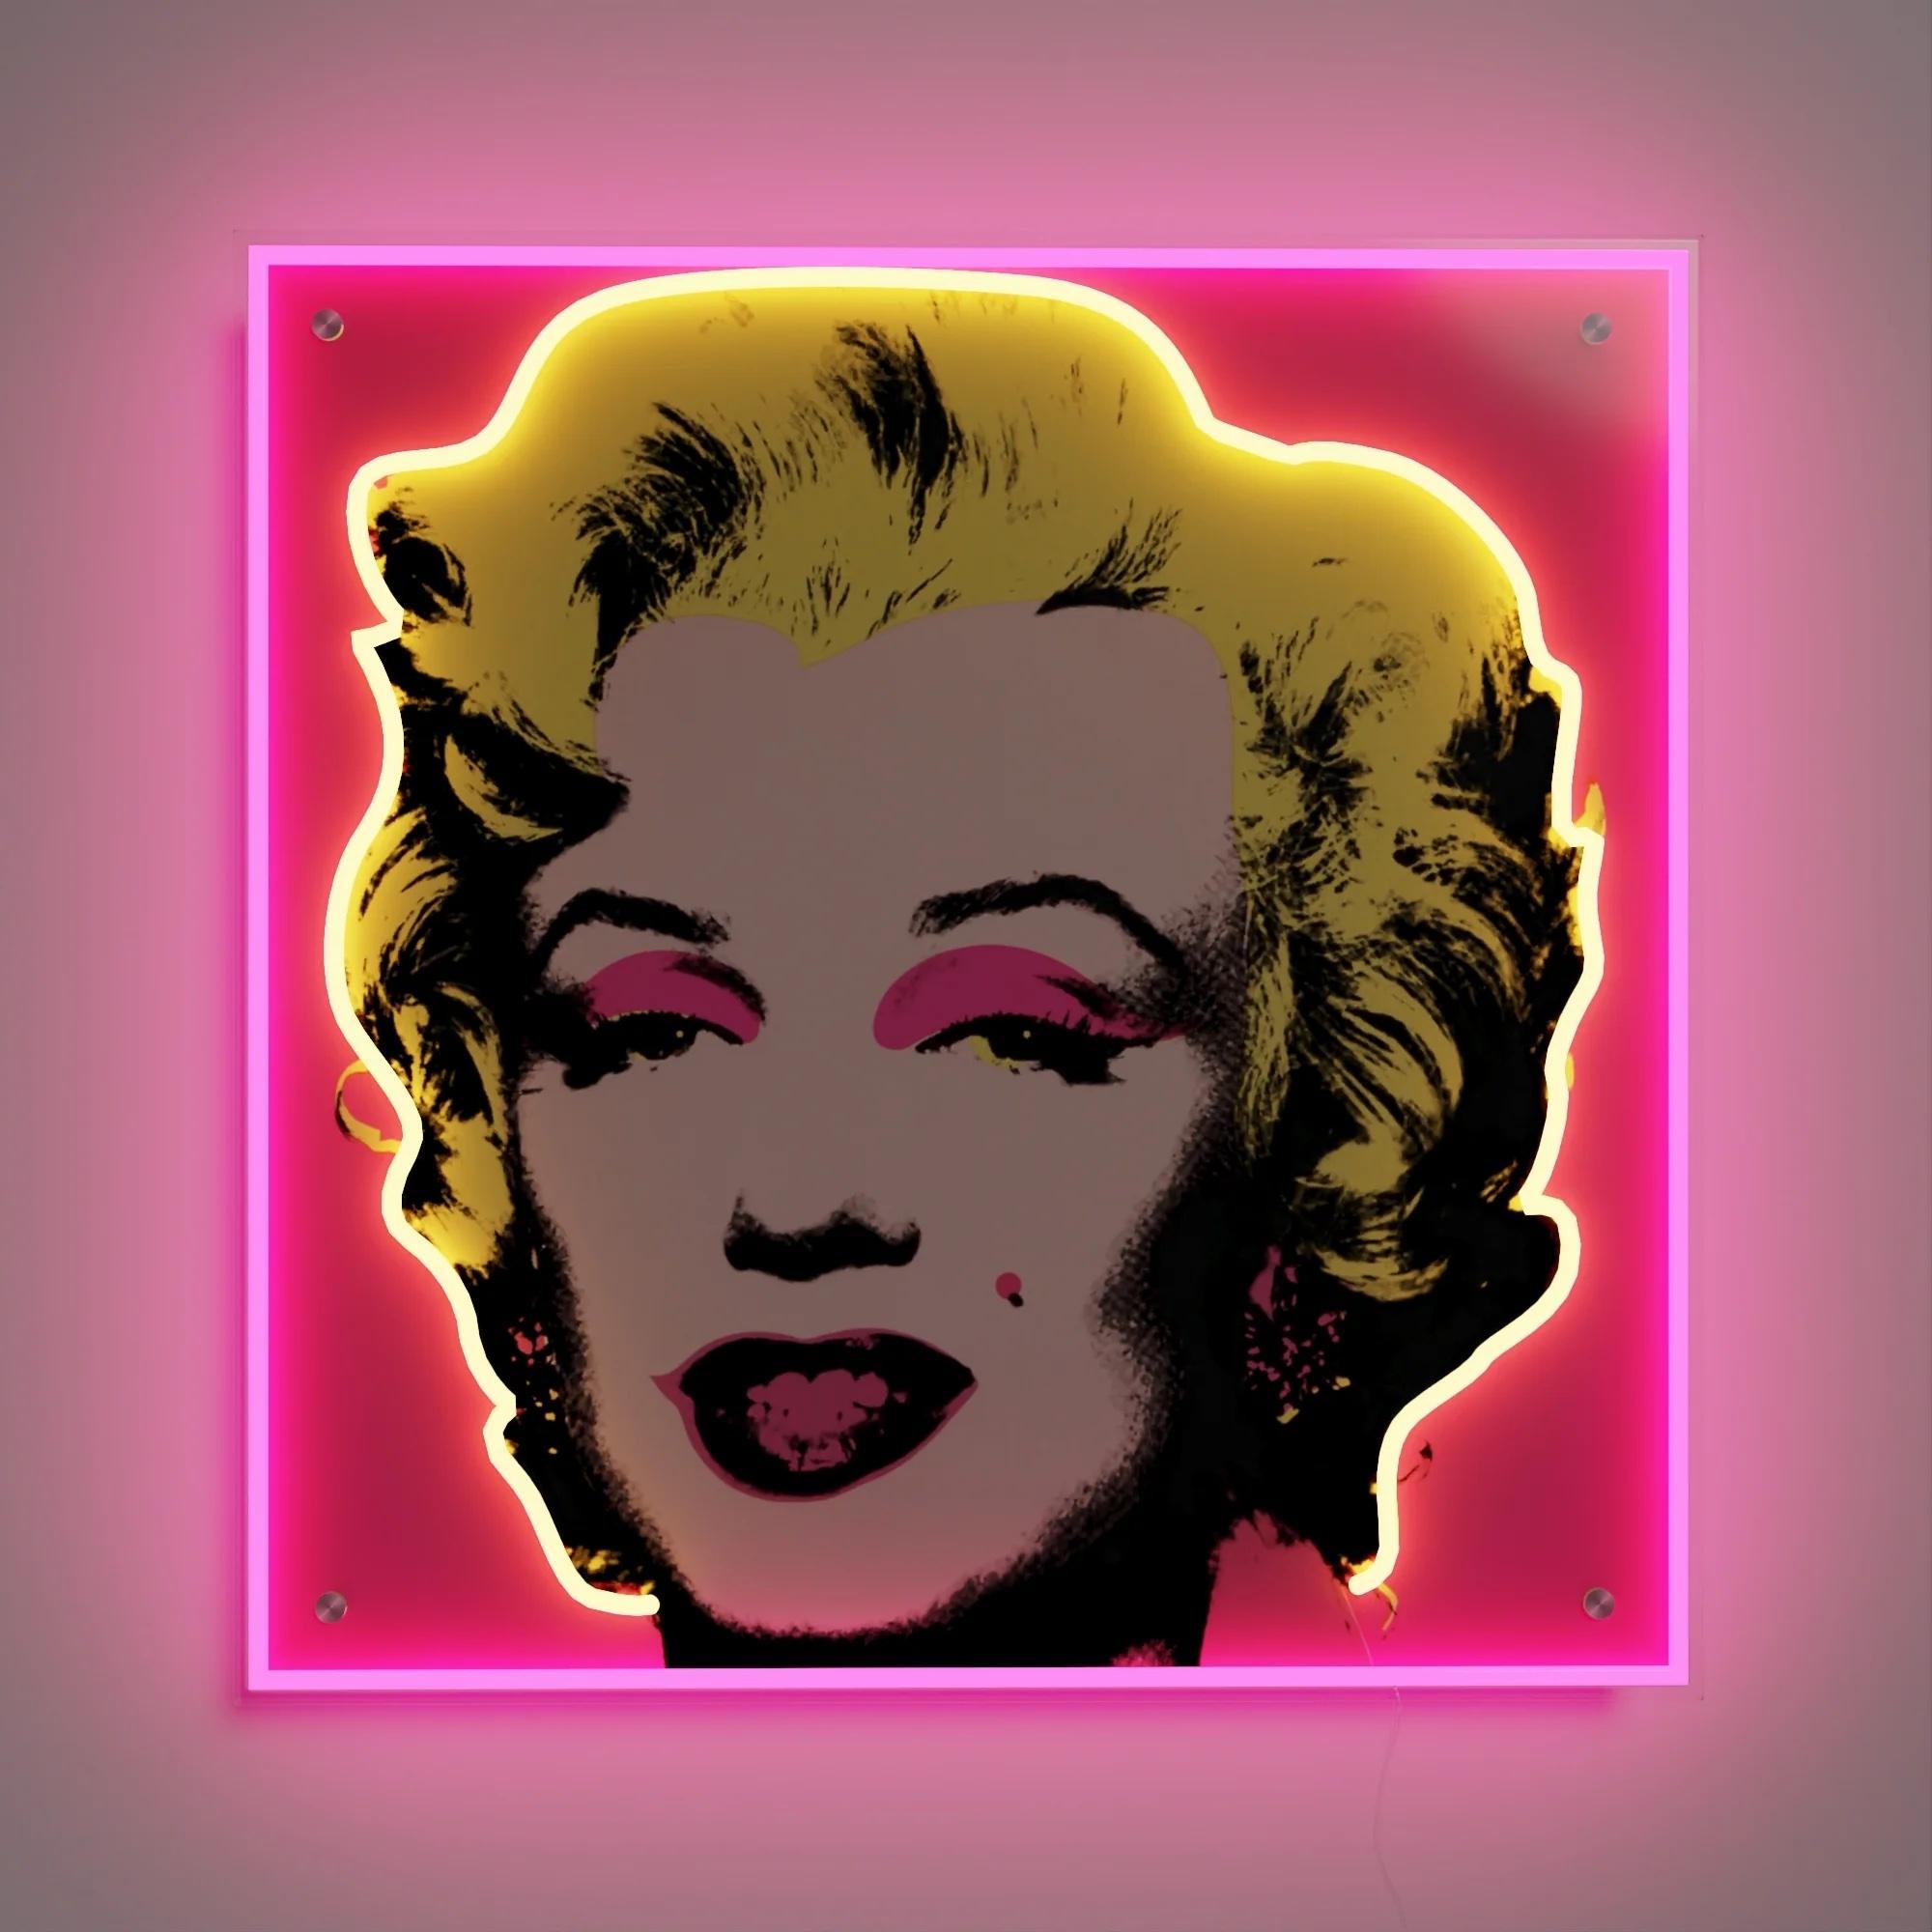 Andy Warhol Portrait Print - Marilyn Monroe (Pink) Limited Edition Neon Wall Hanging Foundation Authorized